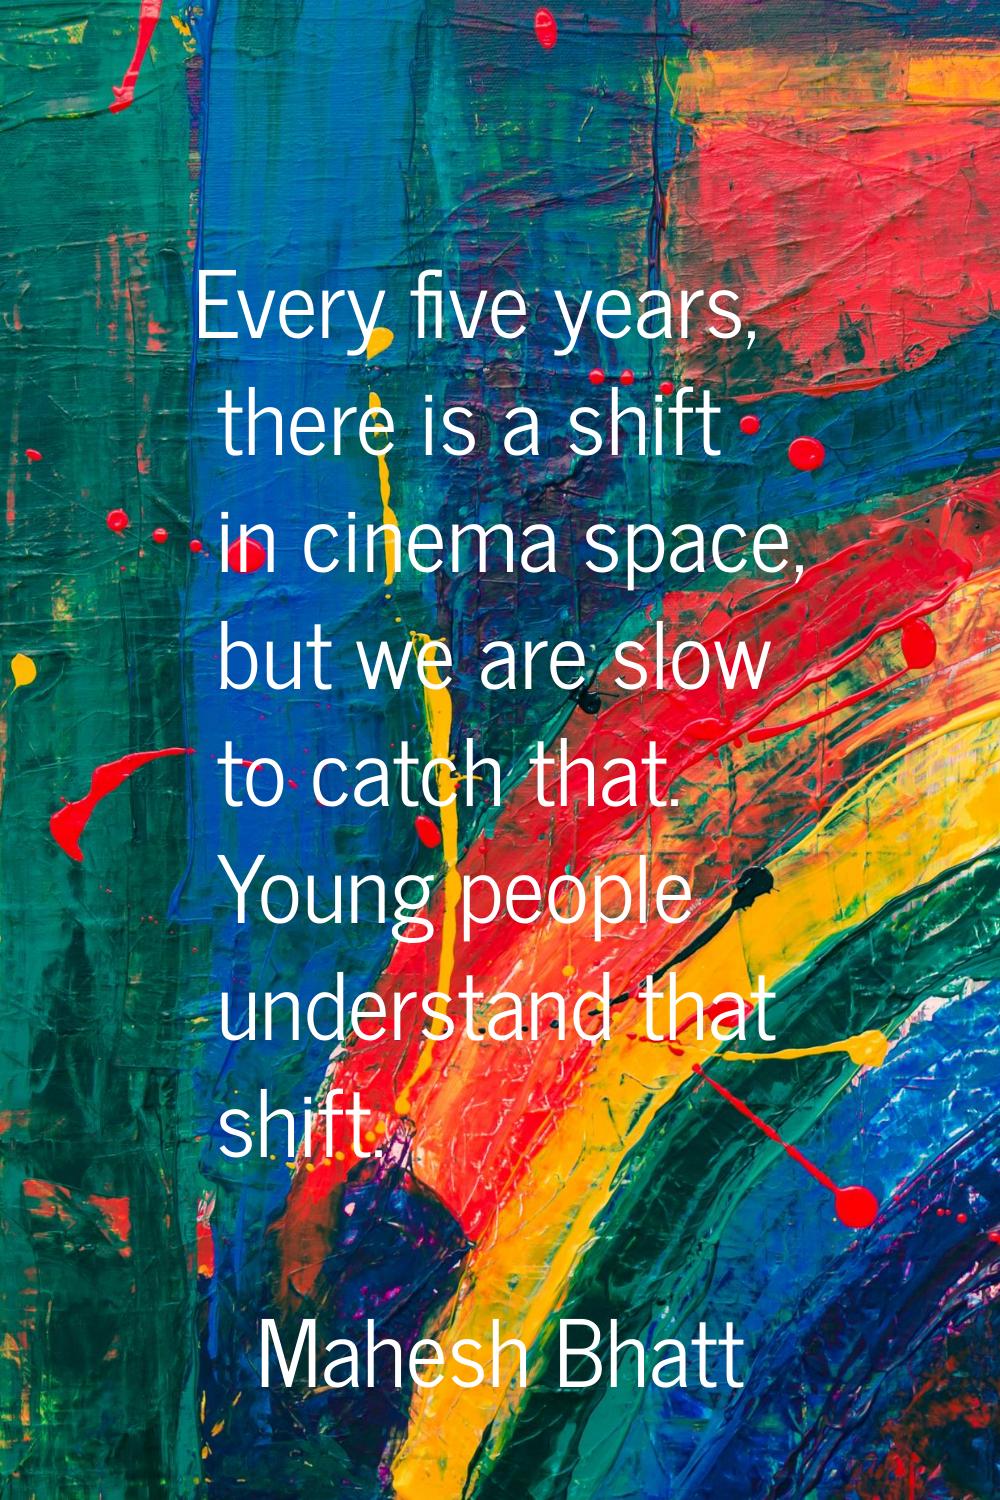 Every five years, there is a shift in cinema space, but we are slow to catch that. Young people und